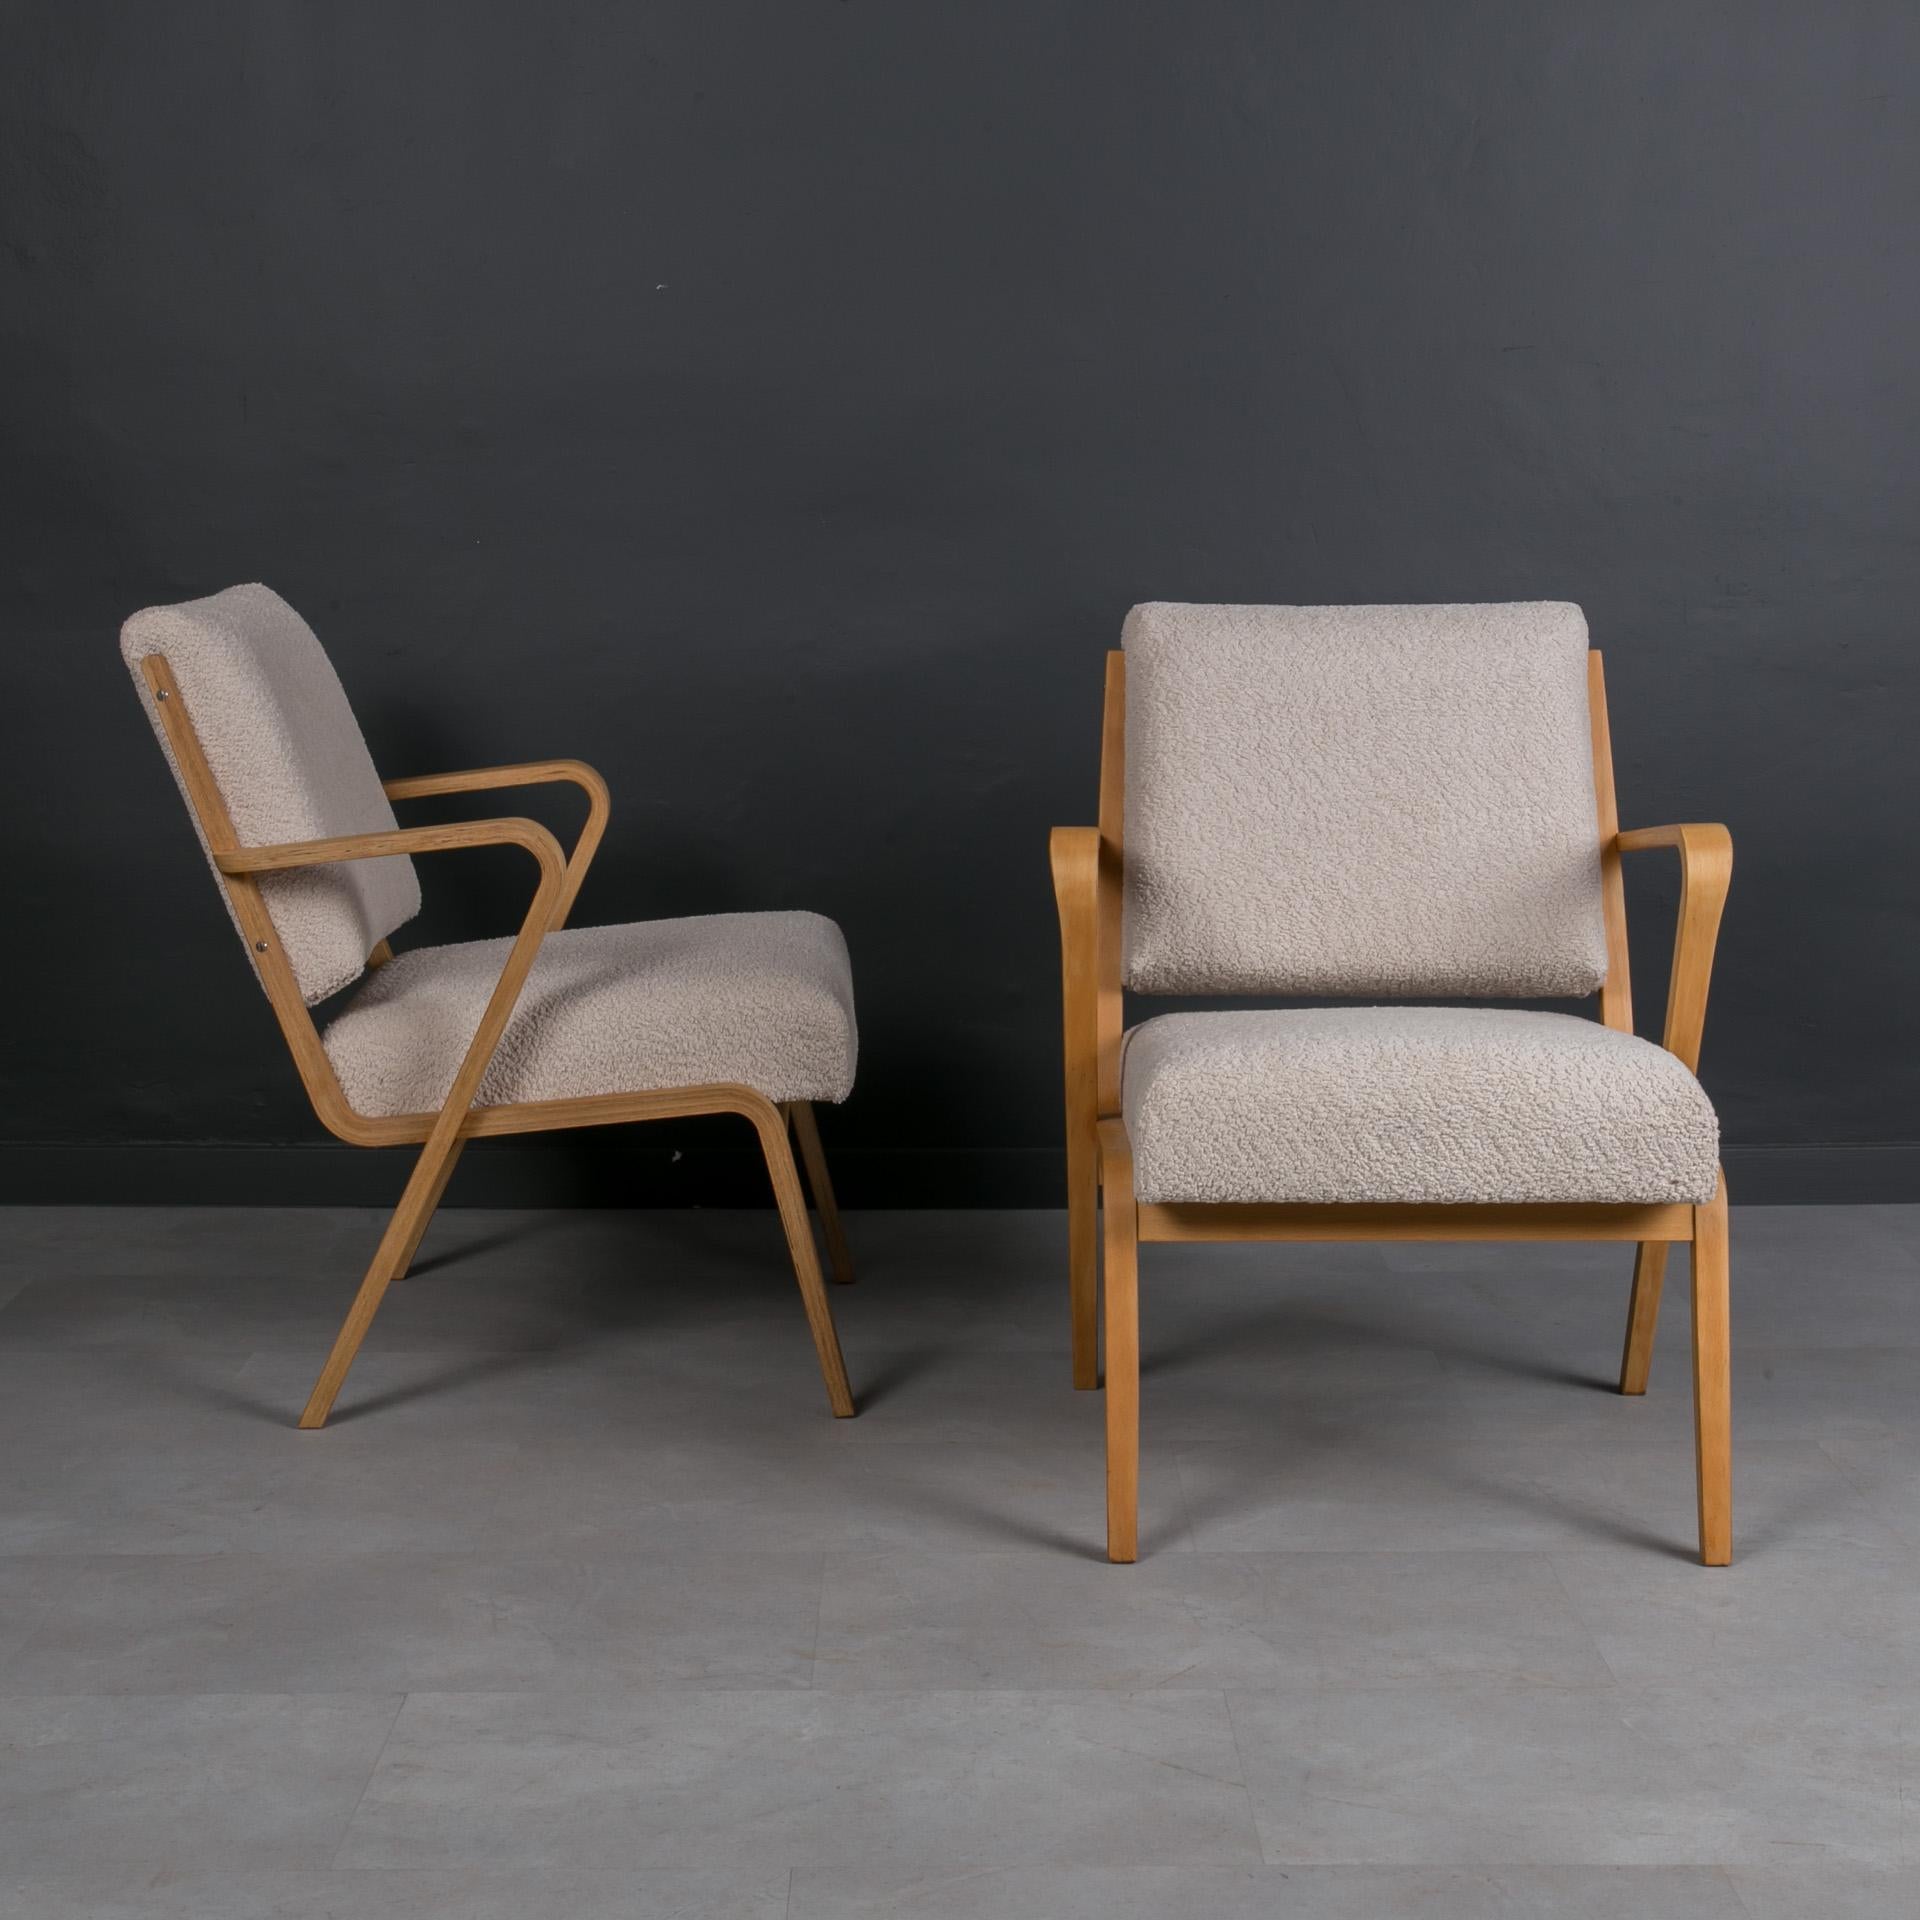 German Set of Two Lounge Chairs by S. Selmanagić, 1960s, Reupholstered in Creamy Boucle For Sale